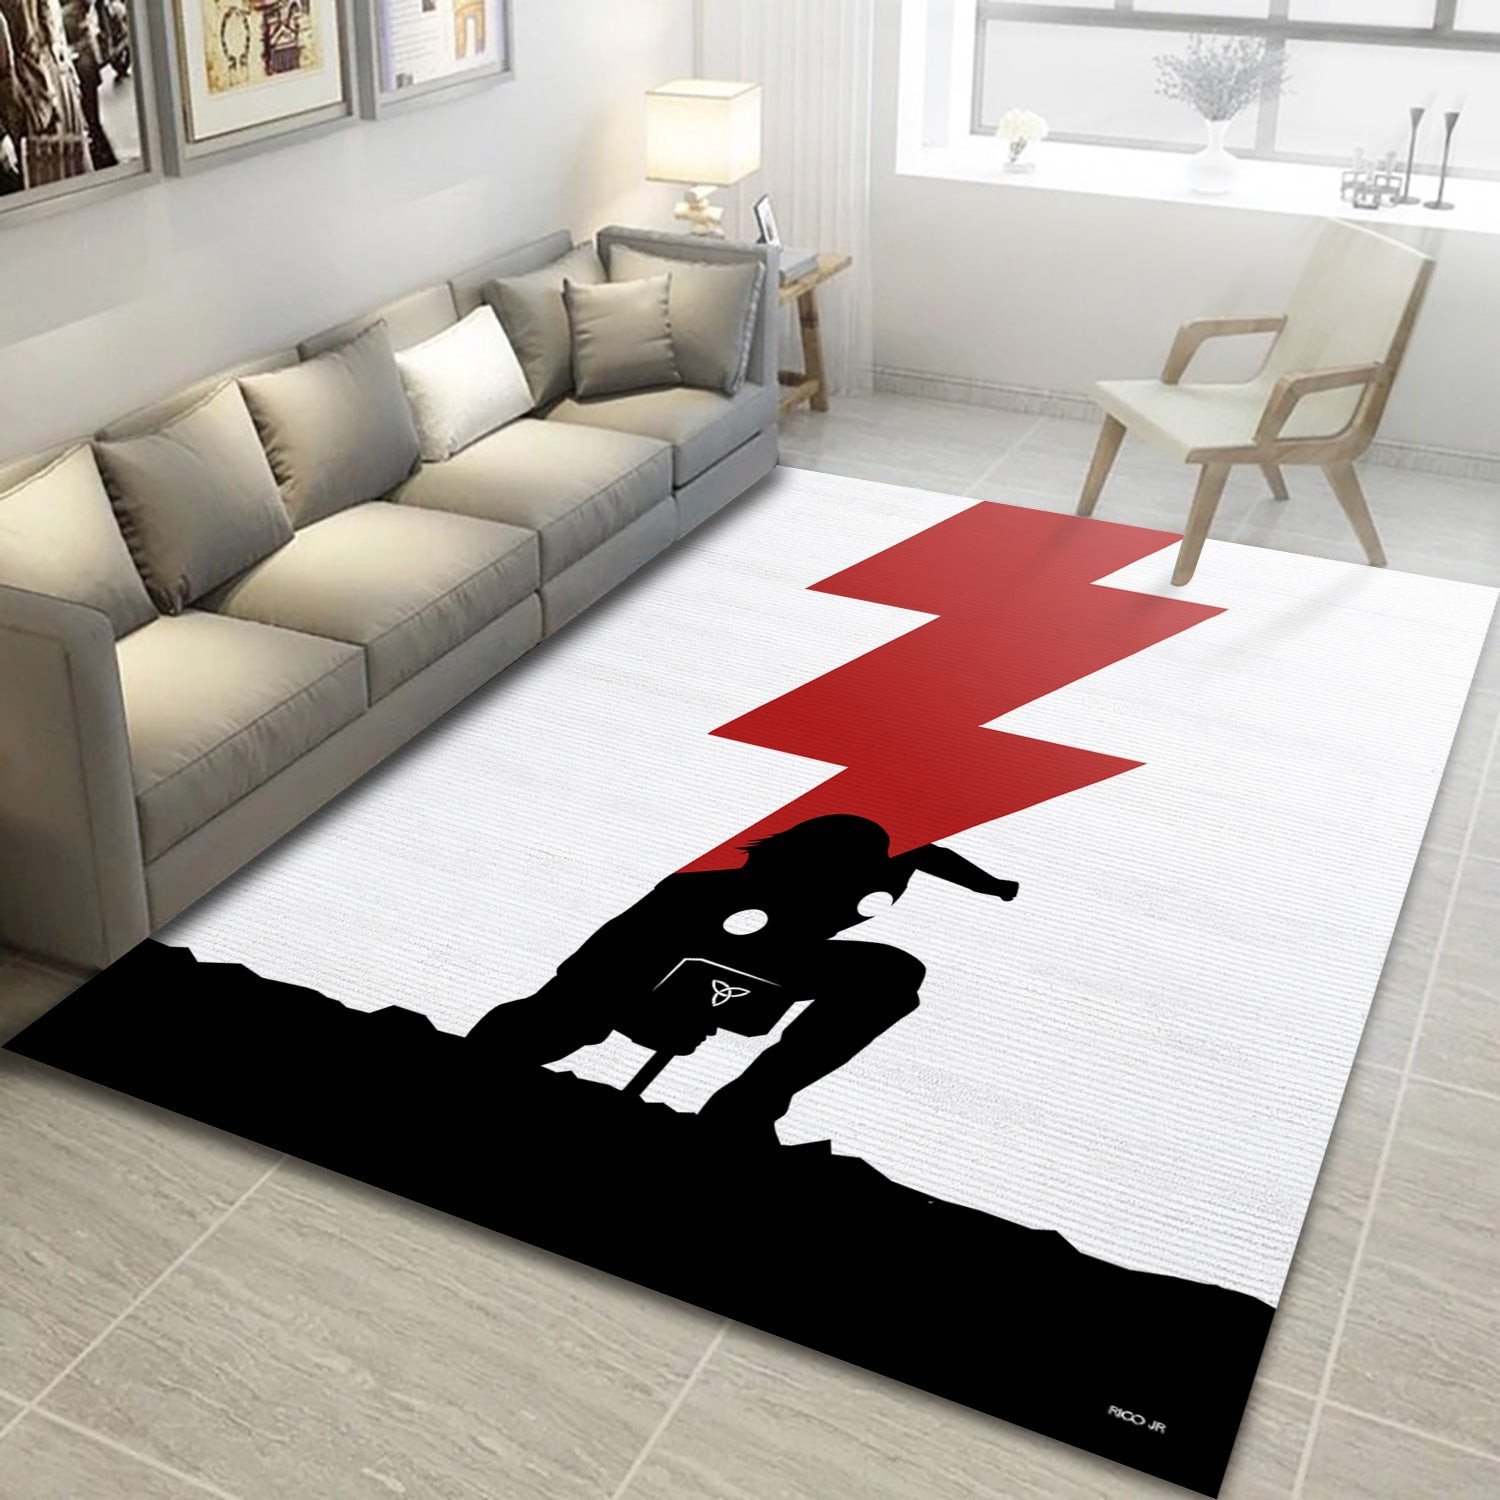 Thor Area Rug, Living Room And Bedroom Rug - Home Decor - Indoor Outdoor Rugs 2